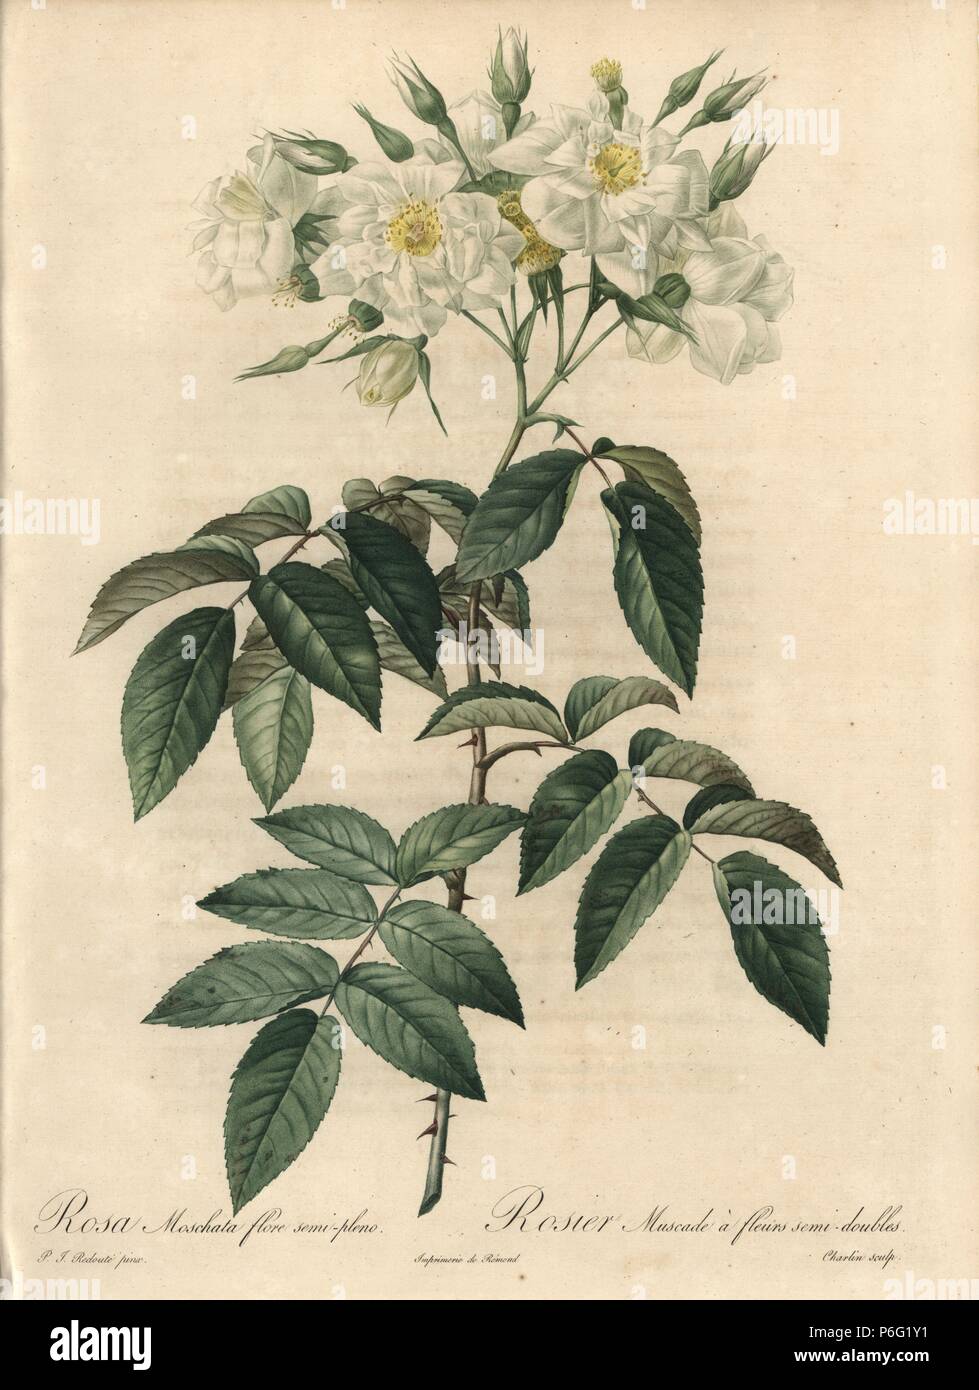 Semi-double musk rose, Rosa moschata var. plena (Rosa moschata flore semi-pleno). Handcoloured stipple copperplate engraving by Charlin after an illustration by Pierre-Joseph Redoute from 'Les Roses,' Firmin Didot, Paris, 1817. Stock Photo